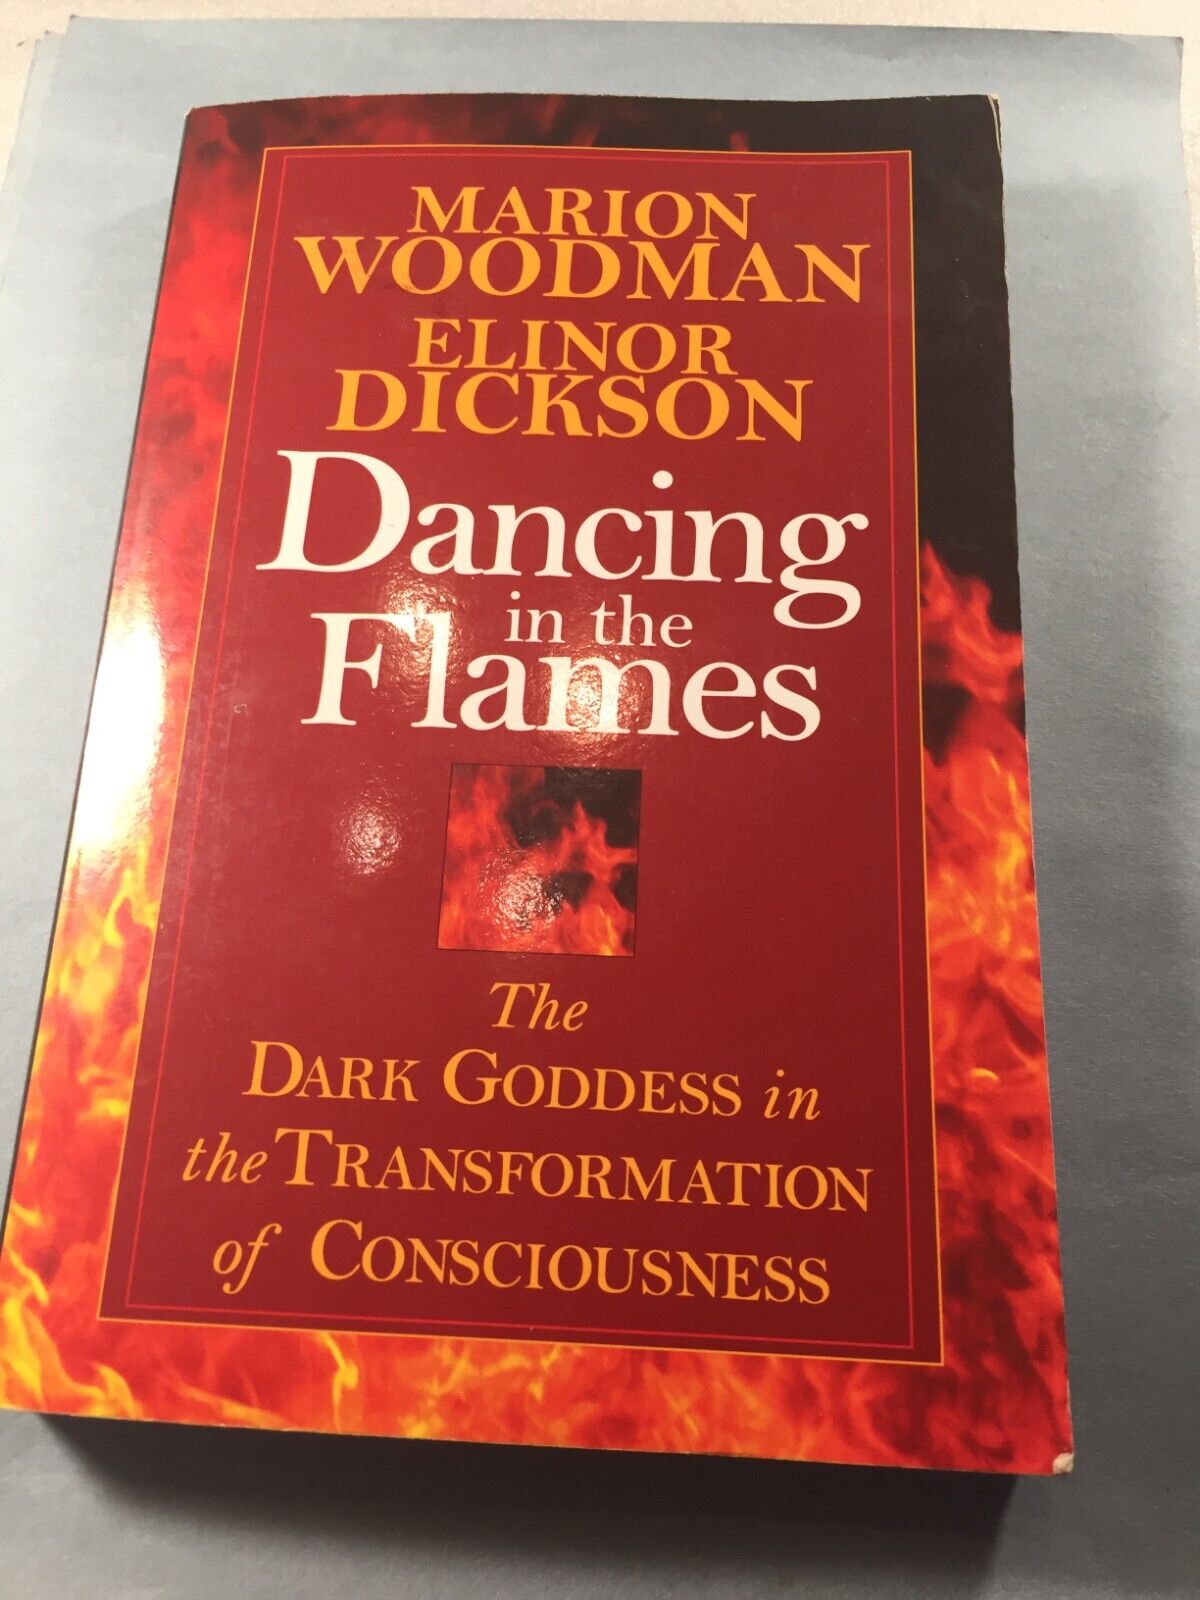 Dancing in the Flames by Marion Woodman, Elinor Dickson